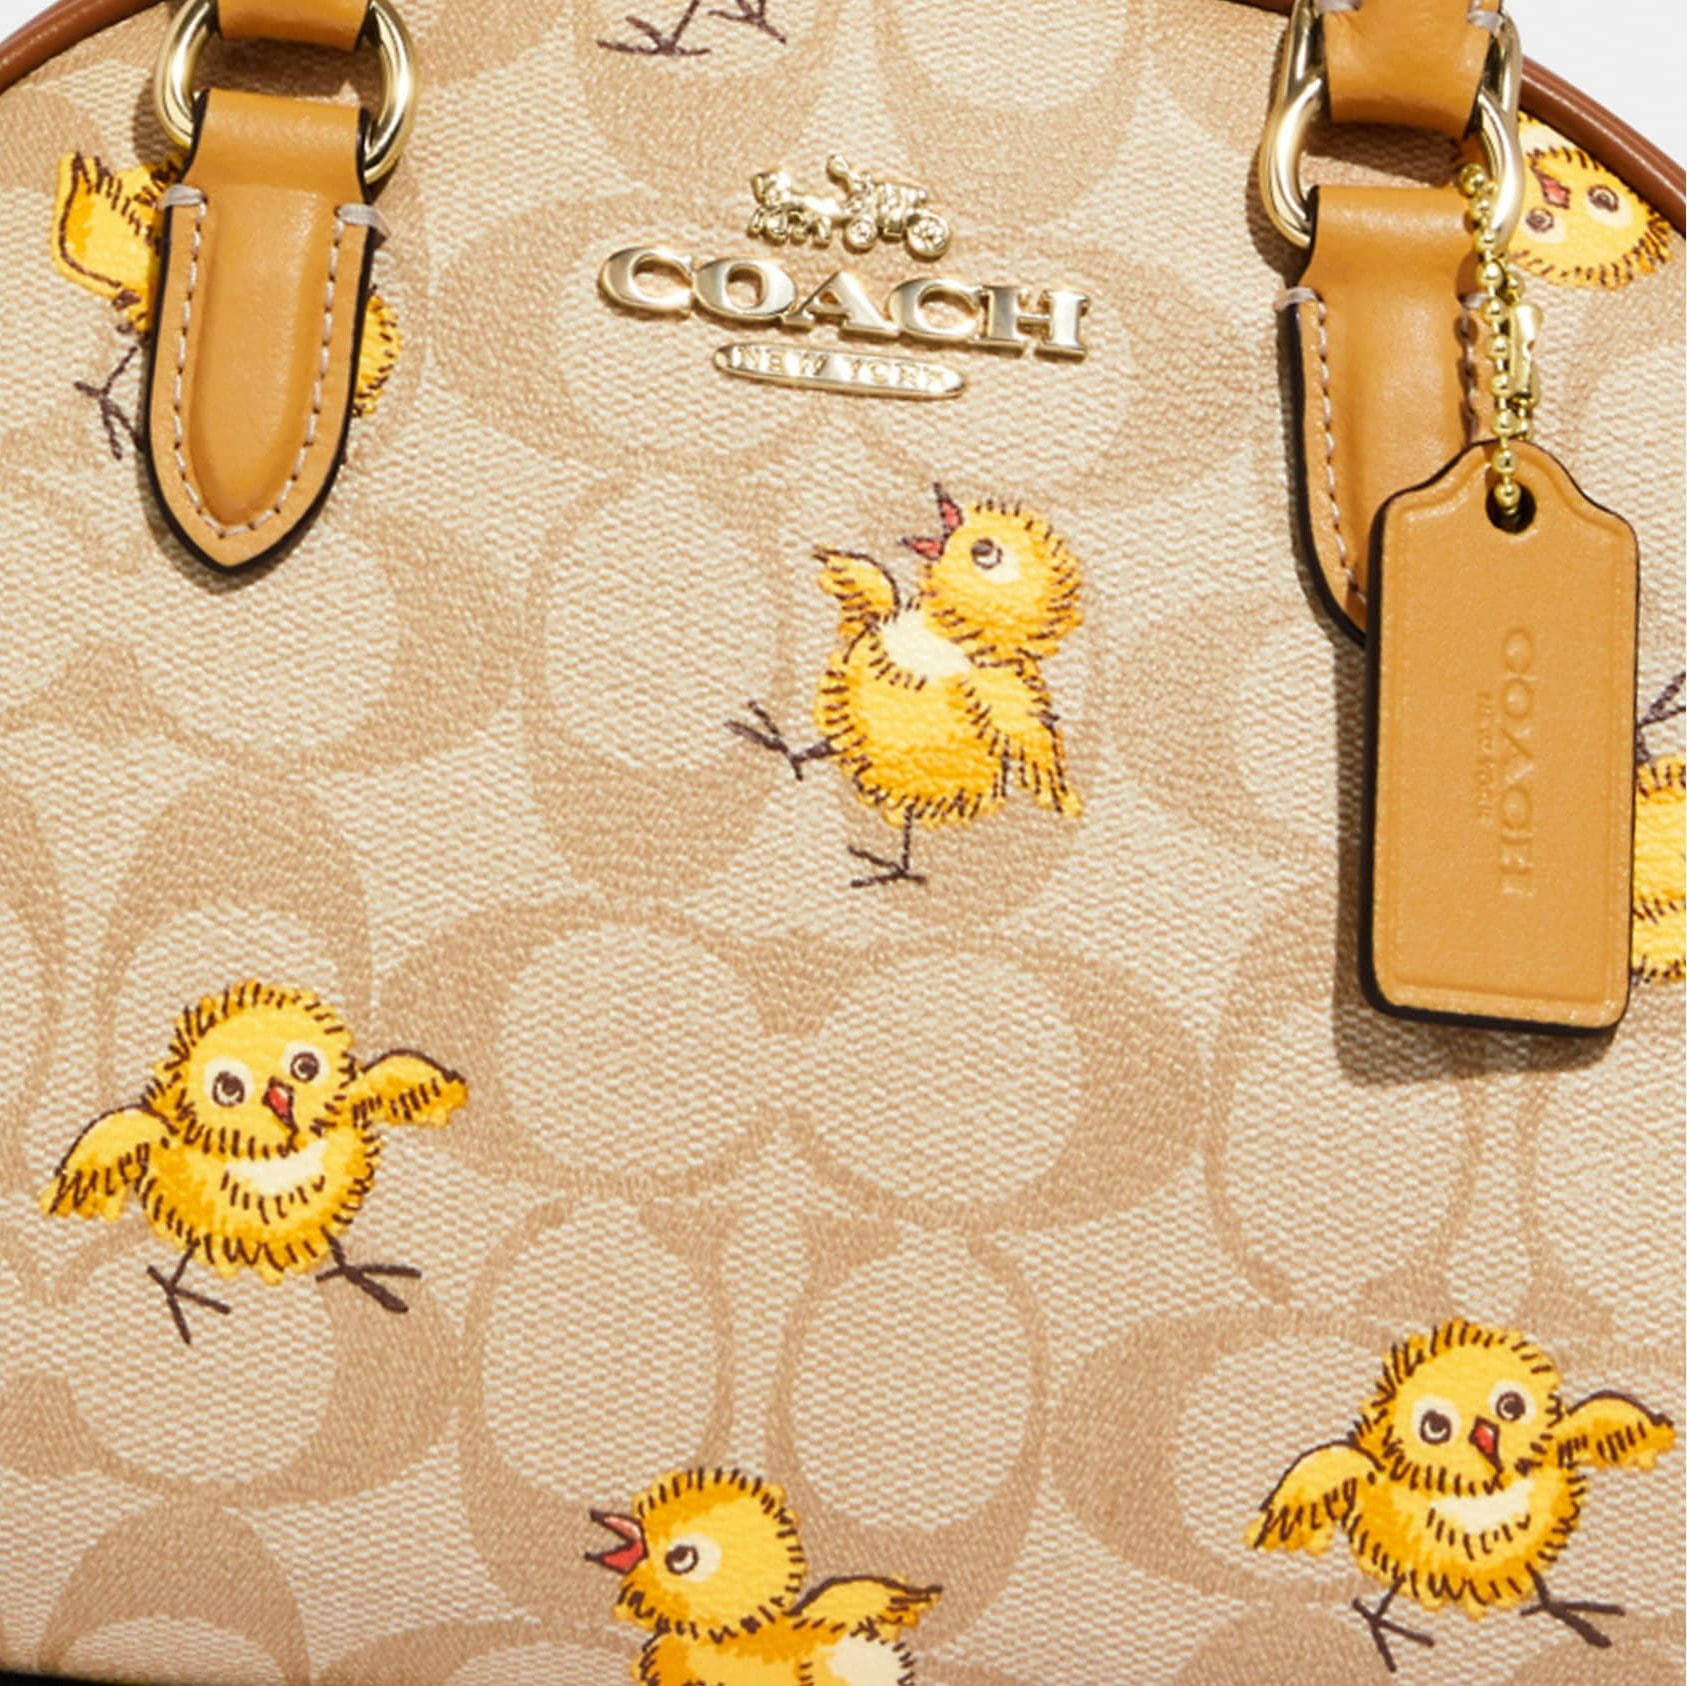 Coach Nolita 15 In Signature Canvas With Tossed Chick Print